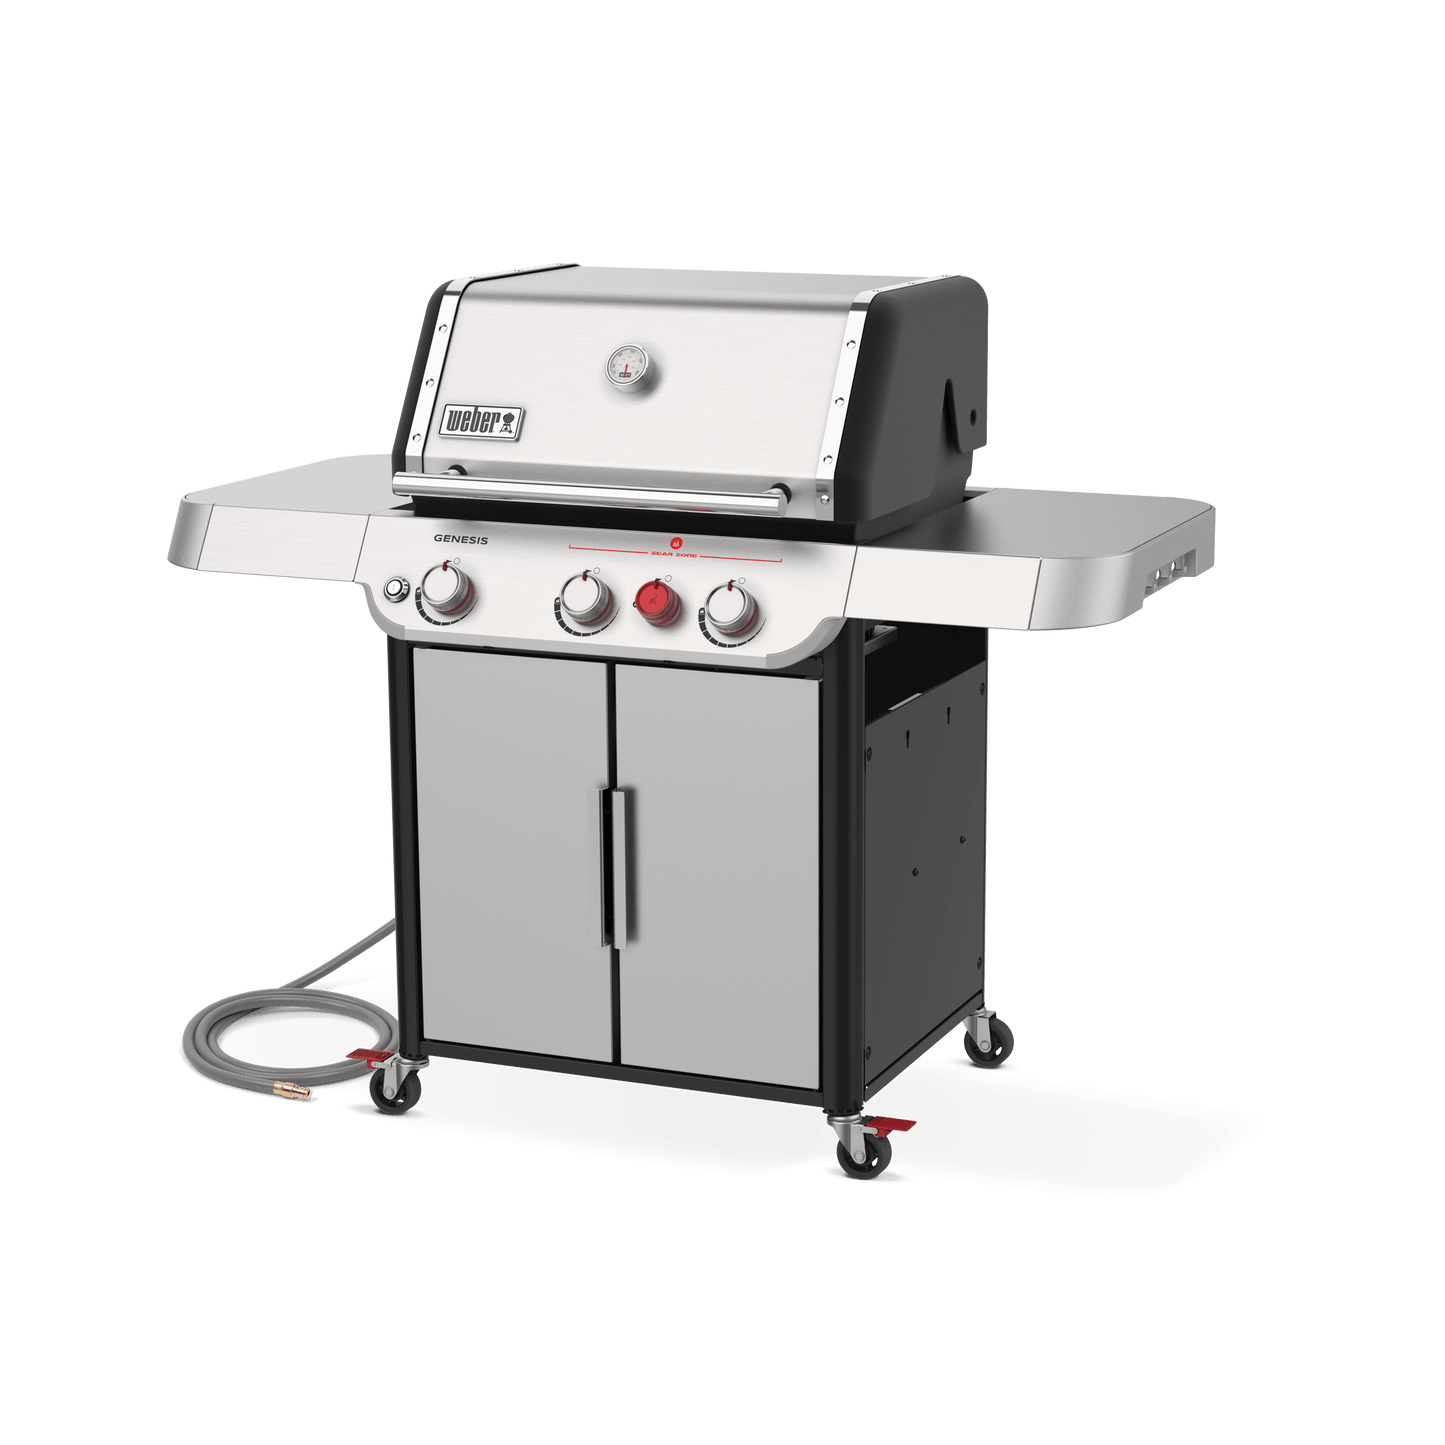 Weber 1500593 Genesis Sp-S-325 Gas Grill (Natural Gas) - Stainless Steel